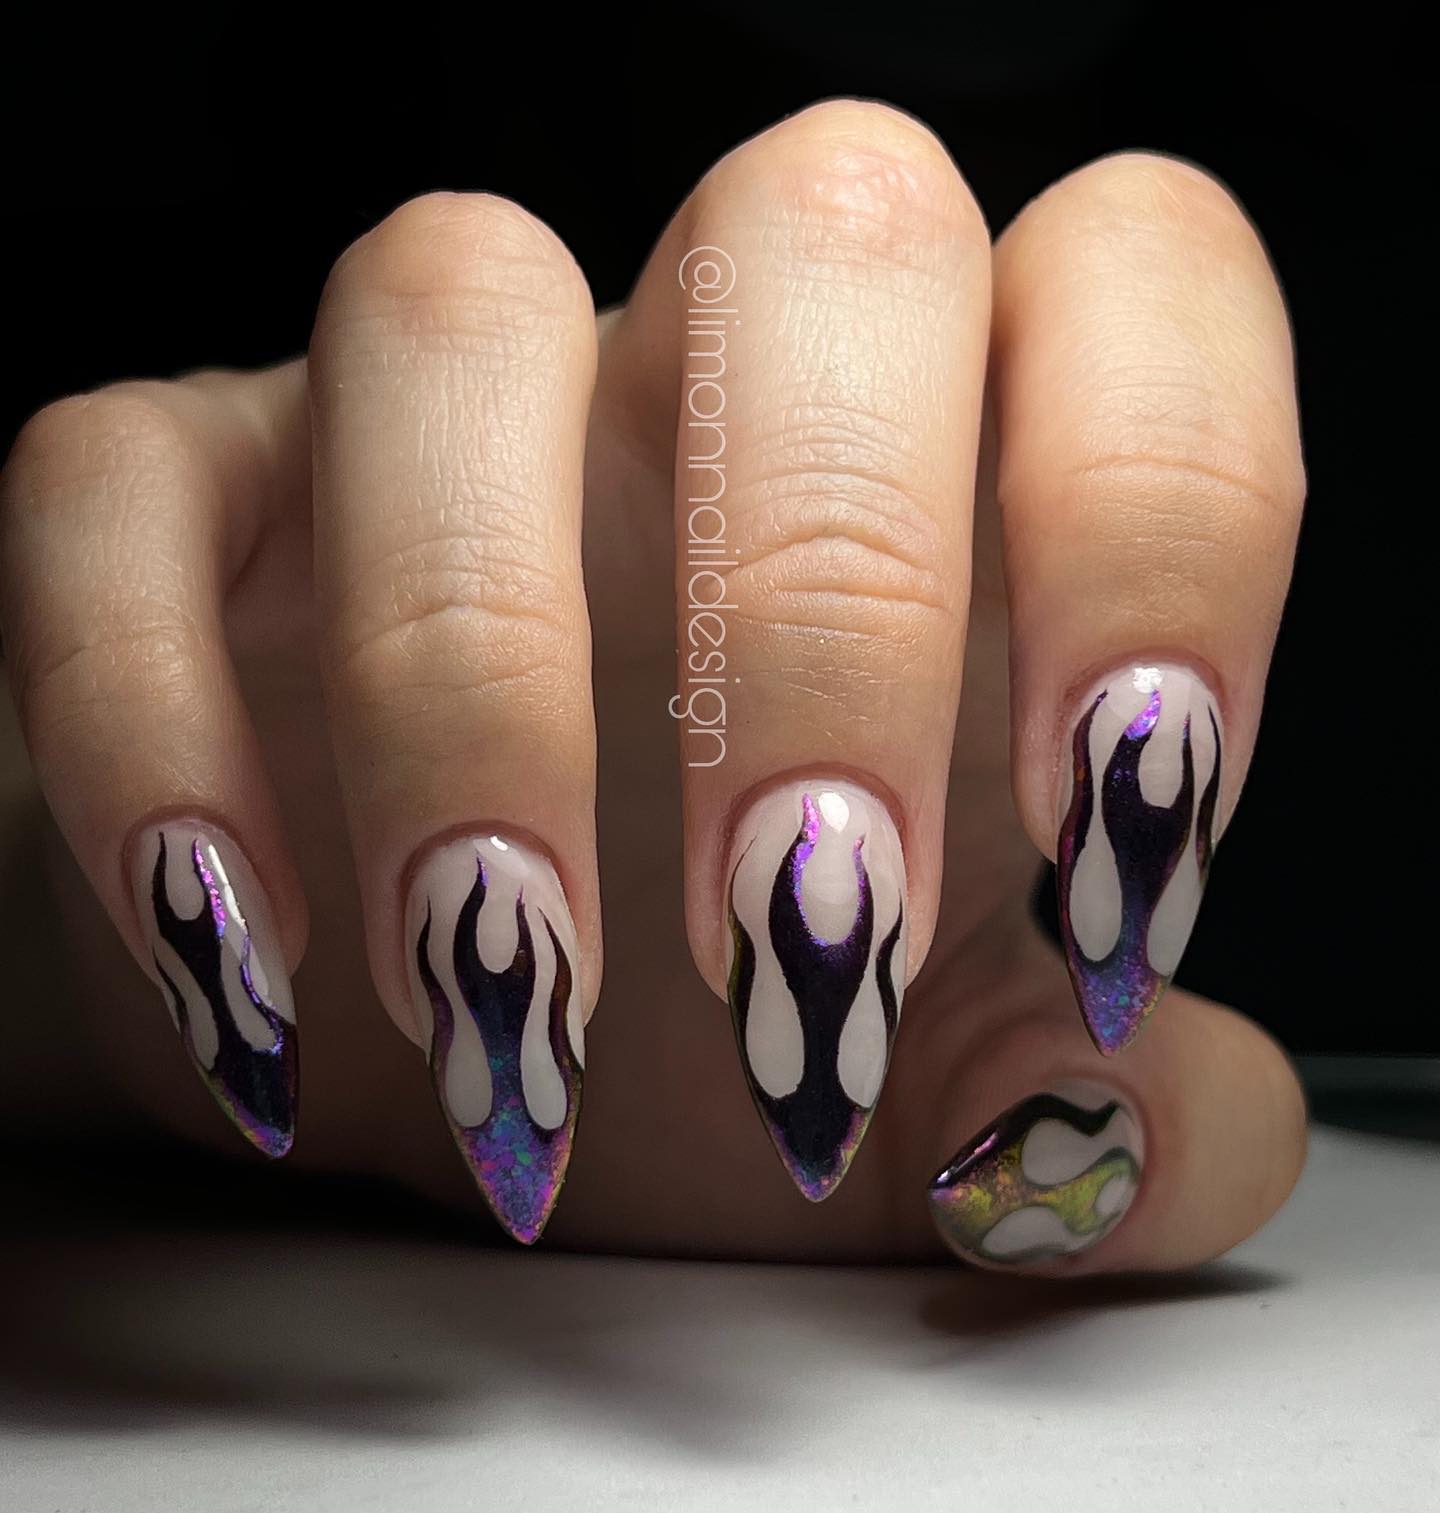 Flame nail designs are so popular these days and stiletto may be the best nail shape for this design. Also, the metallic nail polish looks amazing with these flames.